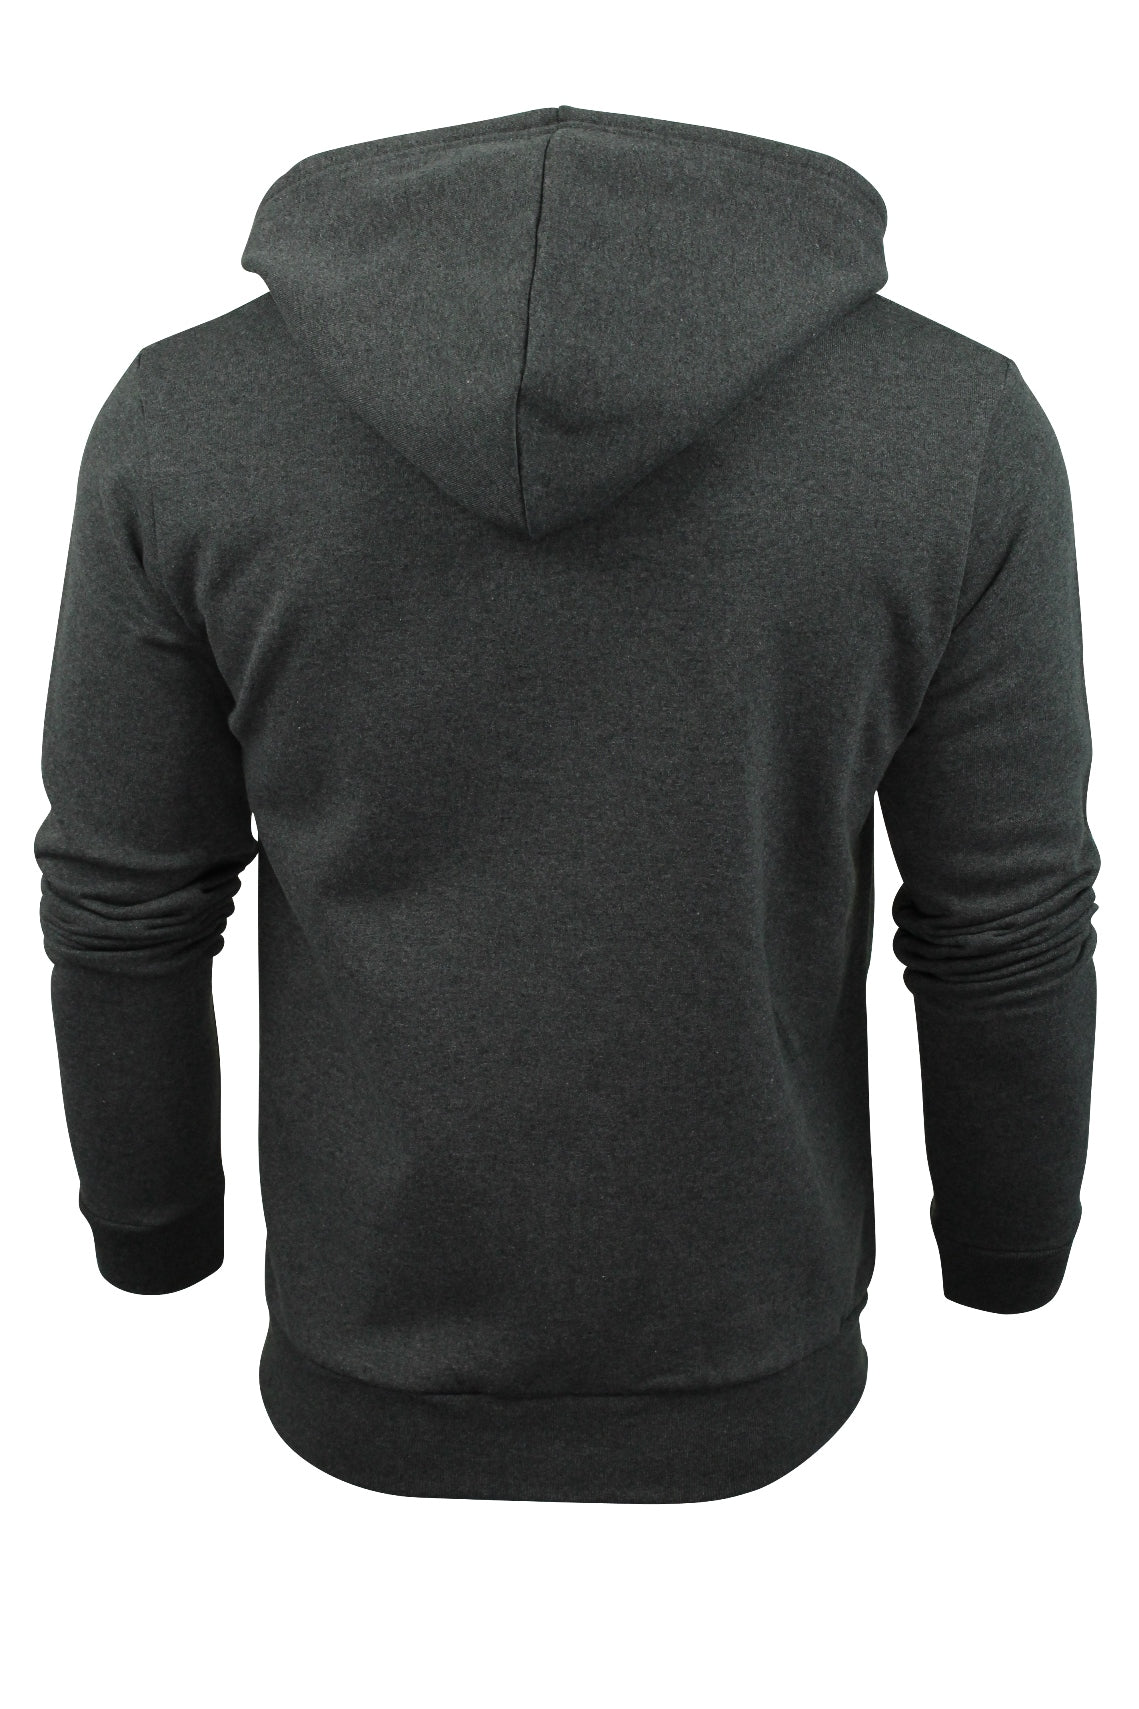 Mens Hoodie Sweat-Top by Xact Clothing Made in England (Charcoal)-3